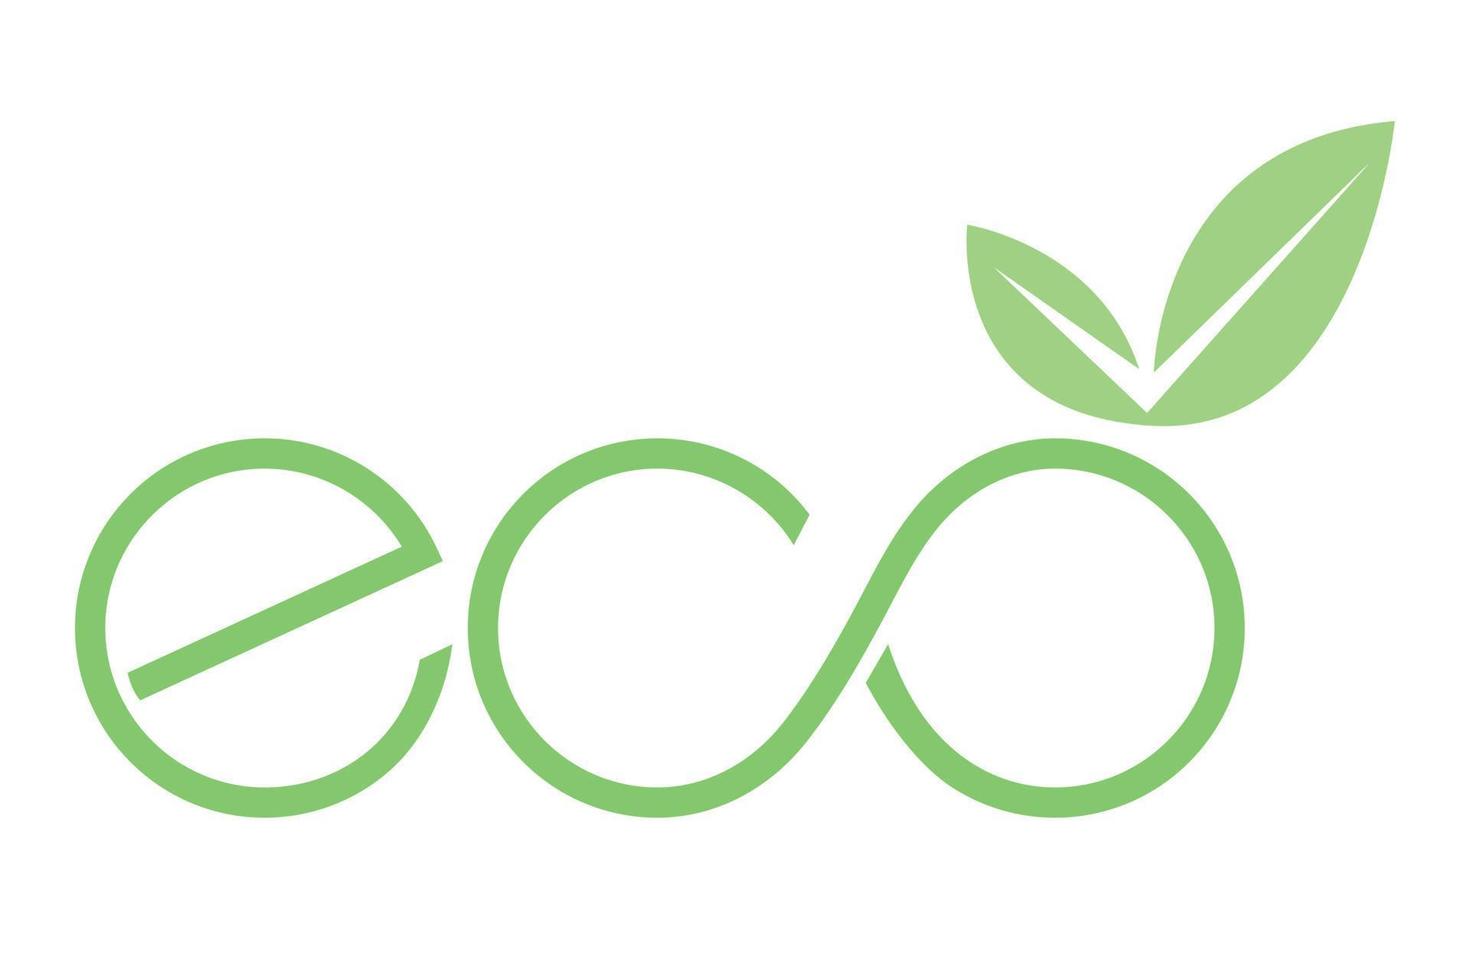 Eco logo green with leaves vector